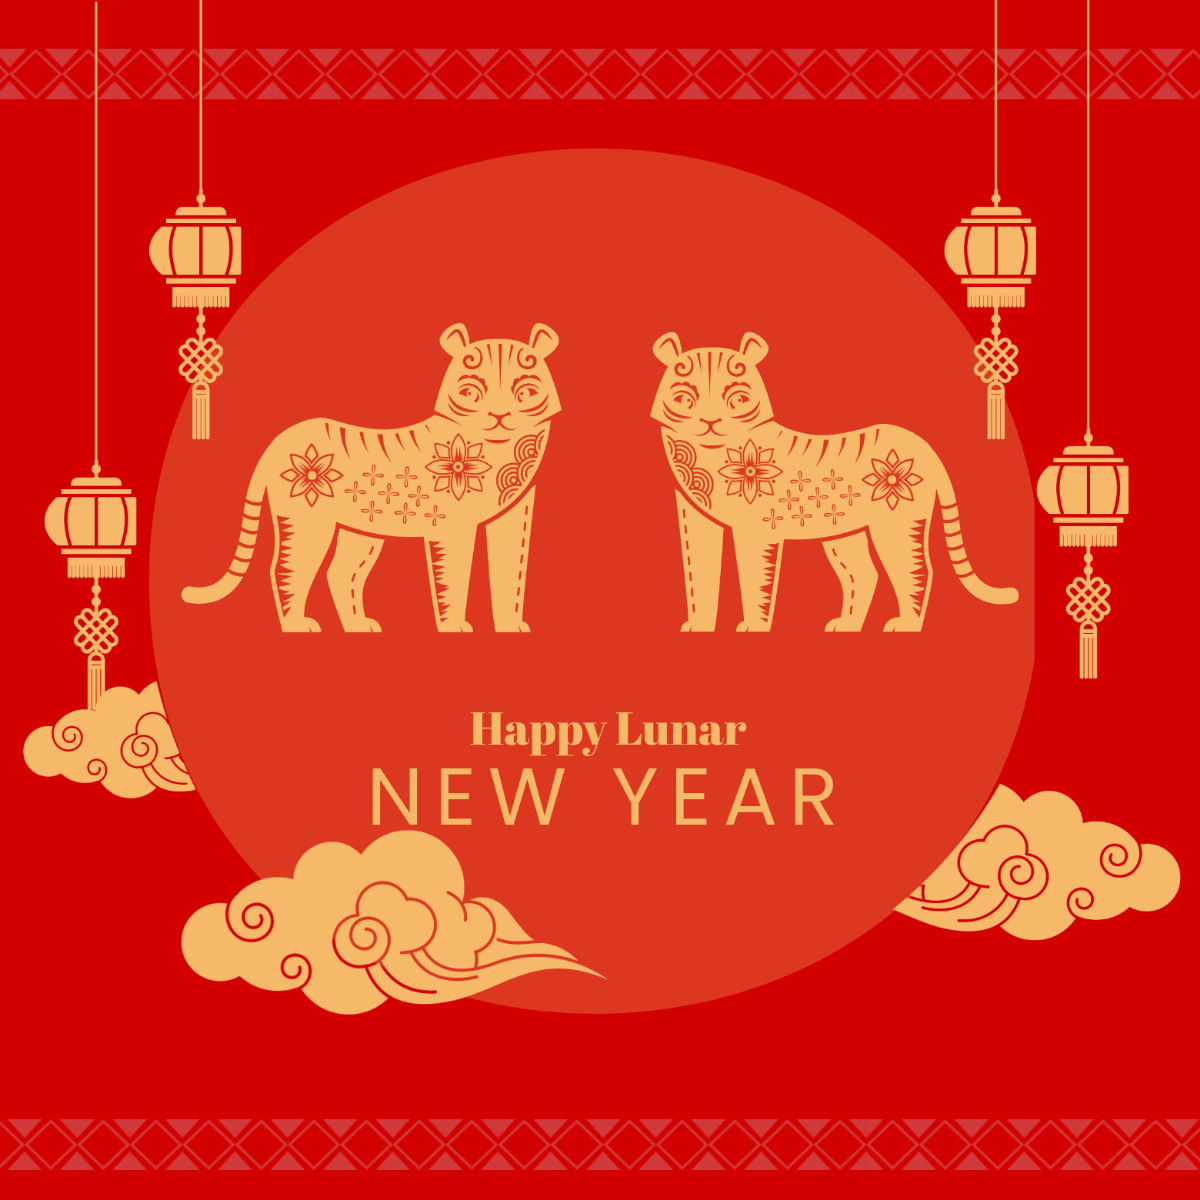 Free Lunar New Year Poster Vector Template